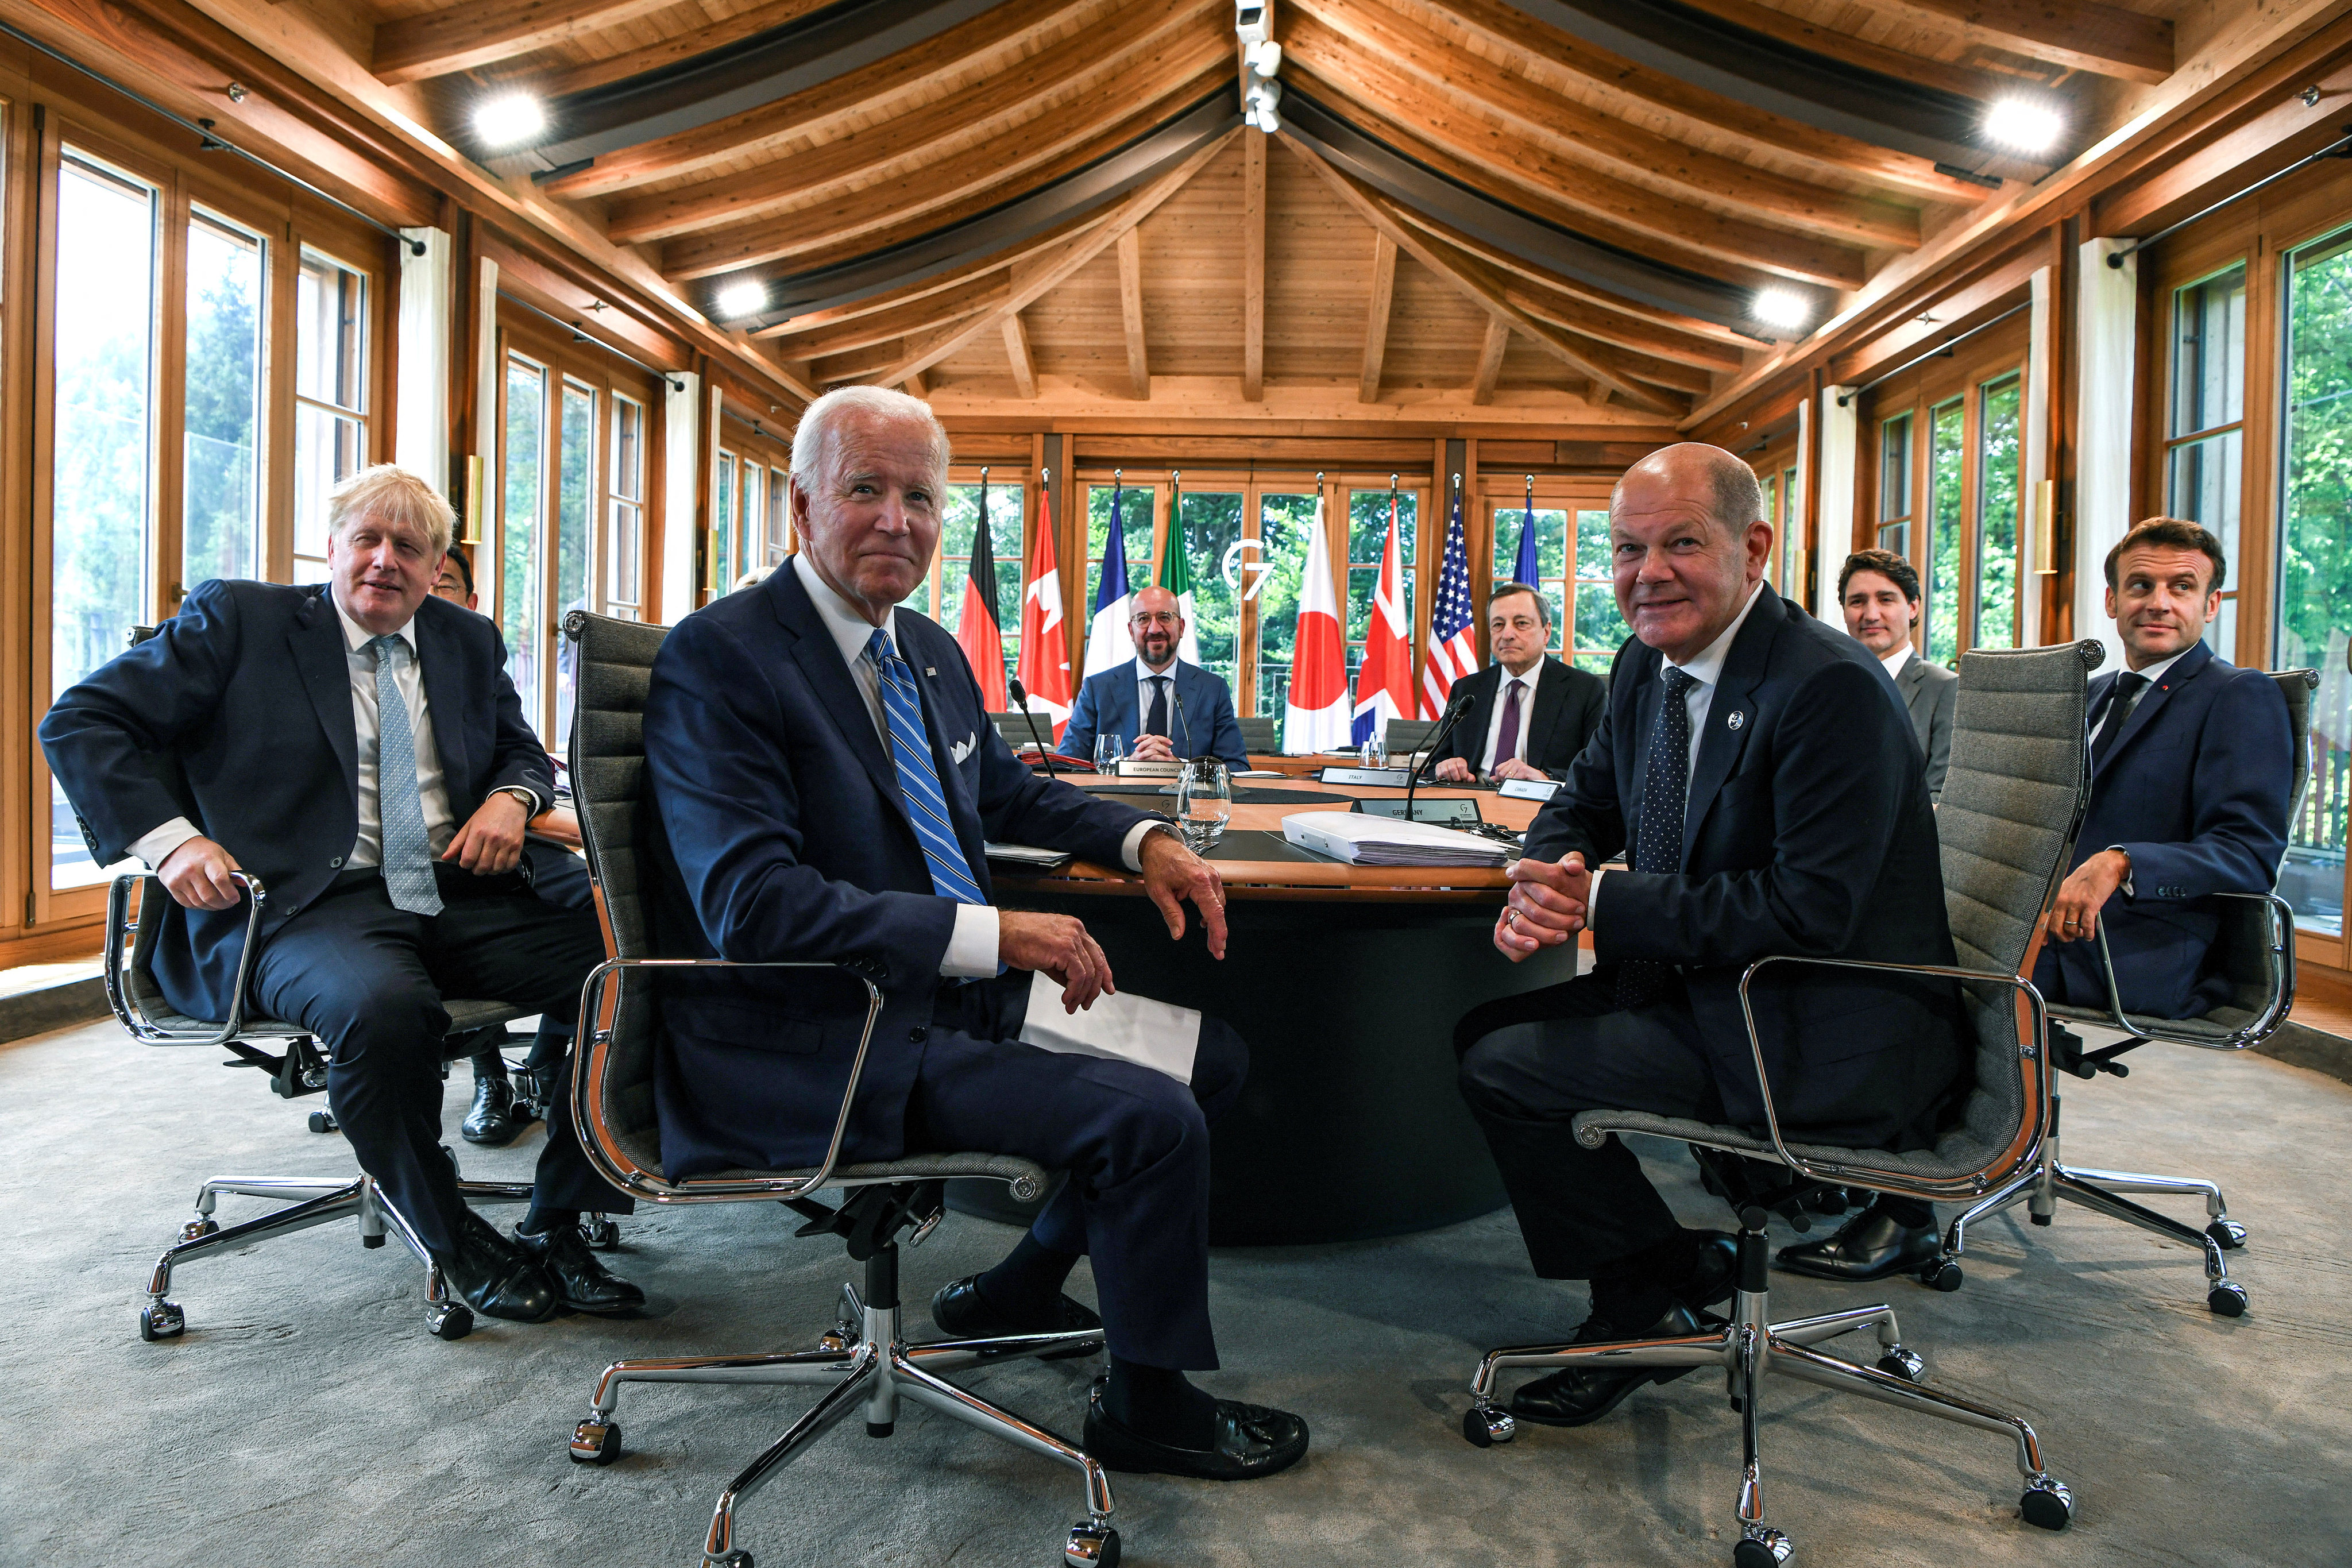 US President Joe Biden attends a working lunch with other G7 leaders to discuss shaping the global economy, at the Yoga Pavilion, Schloss Elmau in Kuren, Germany, on June 26. Photo: Reuters